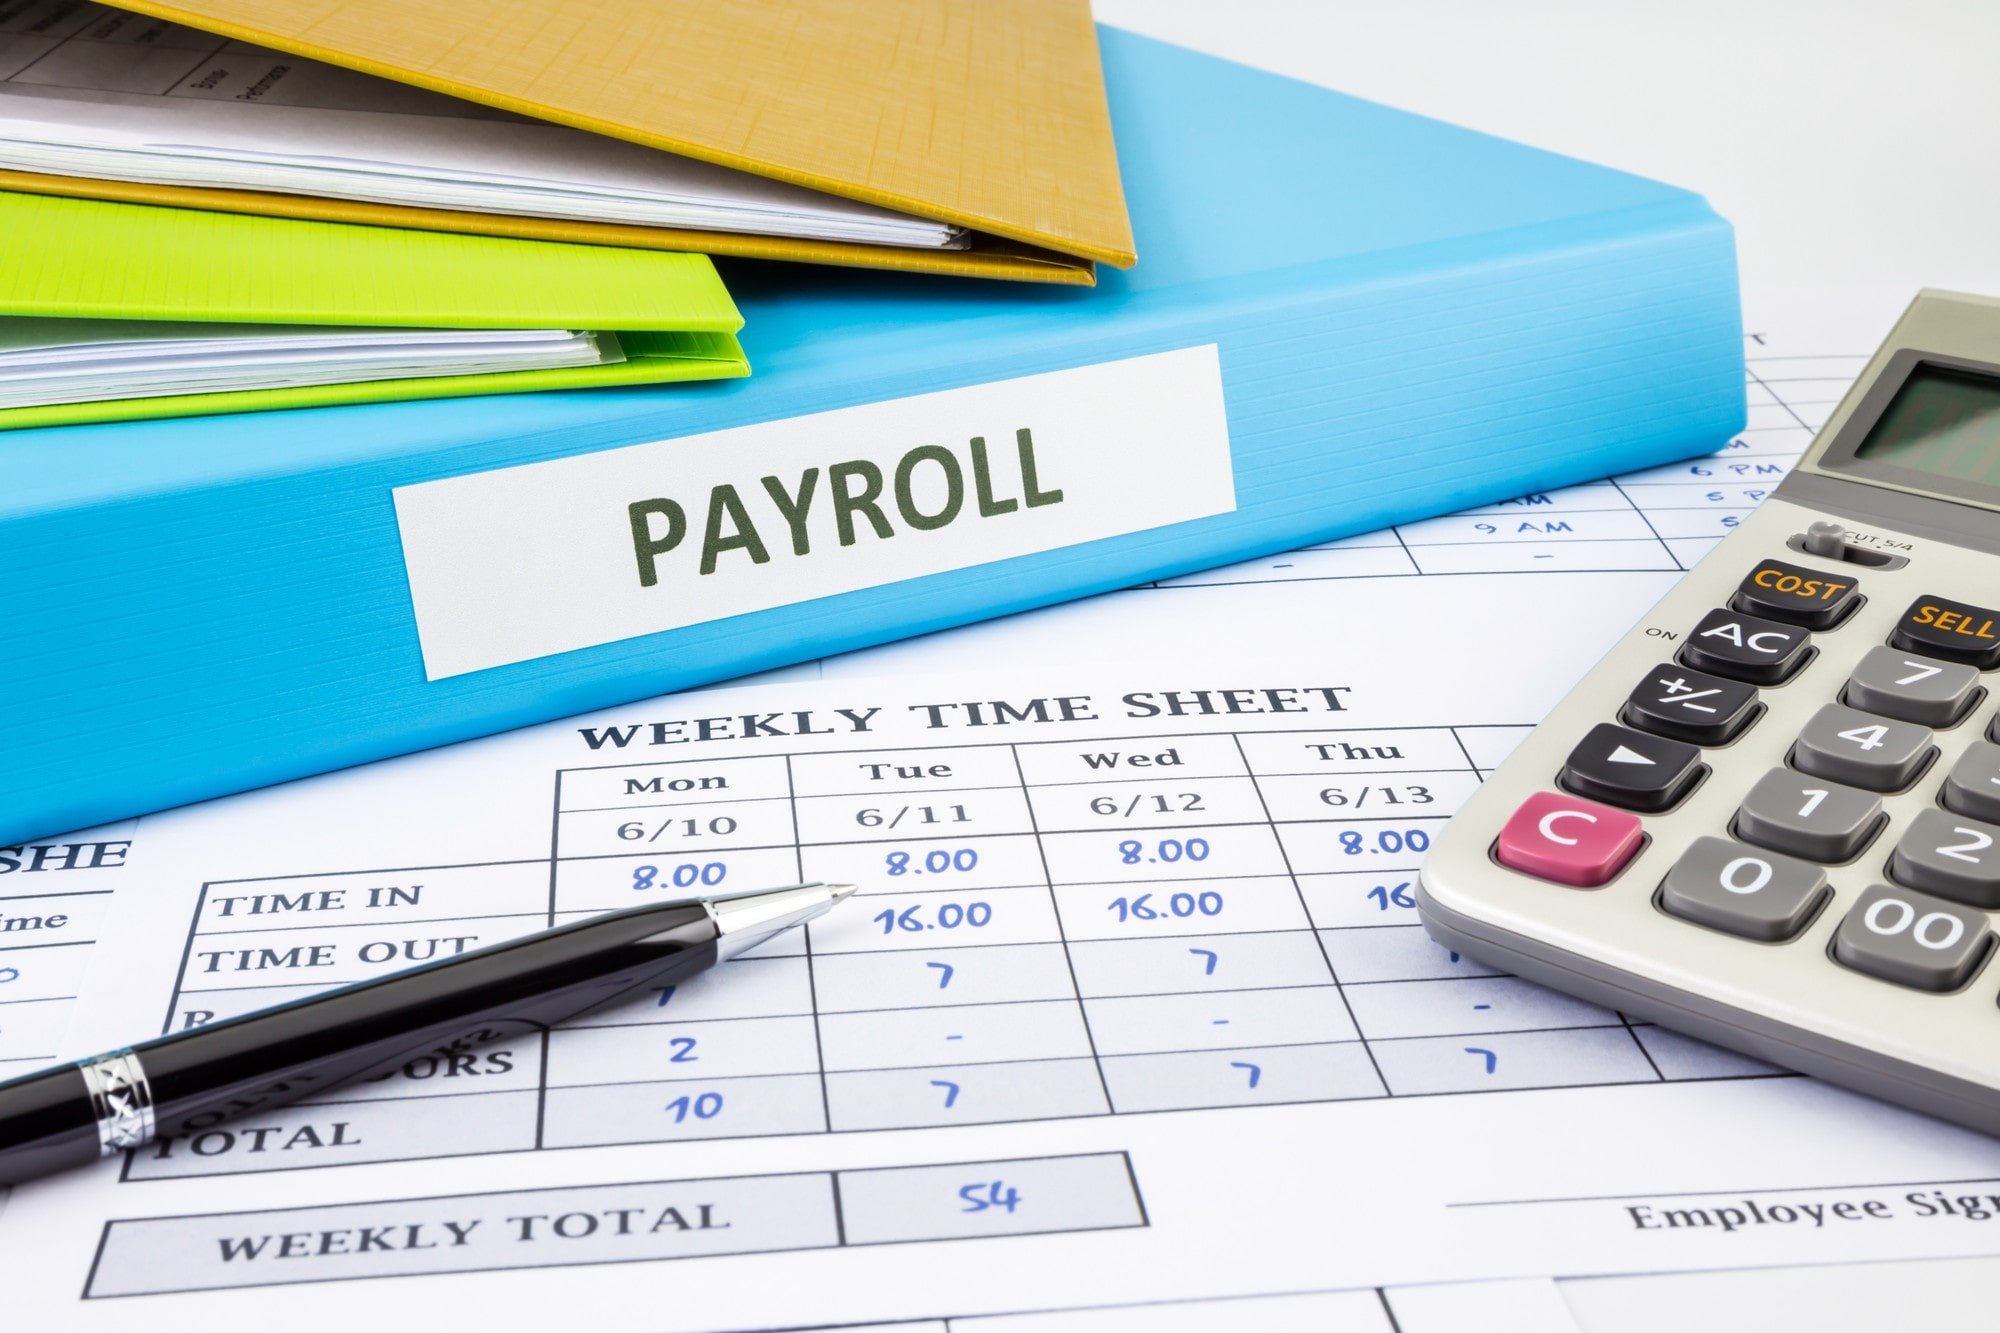 Payroll Documents and a Calculator